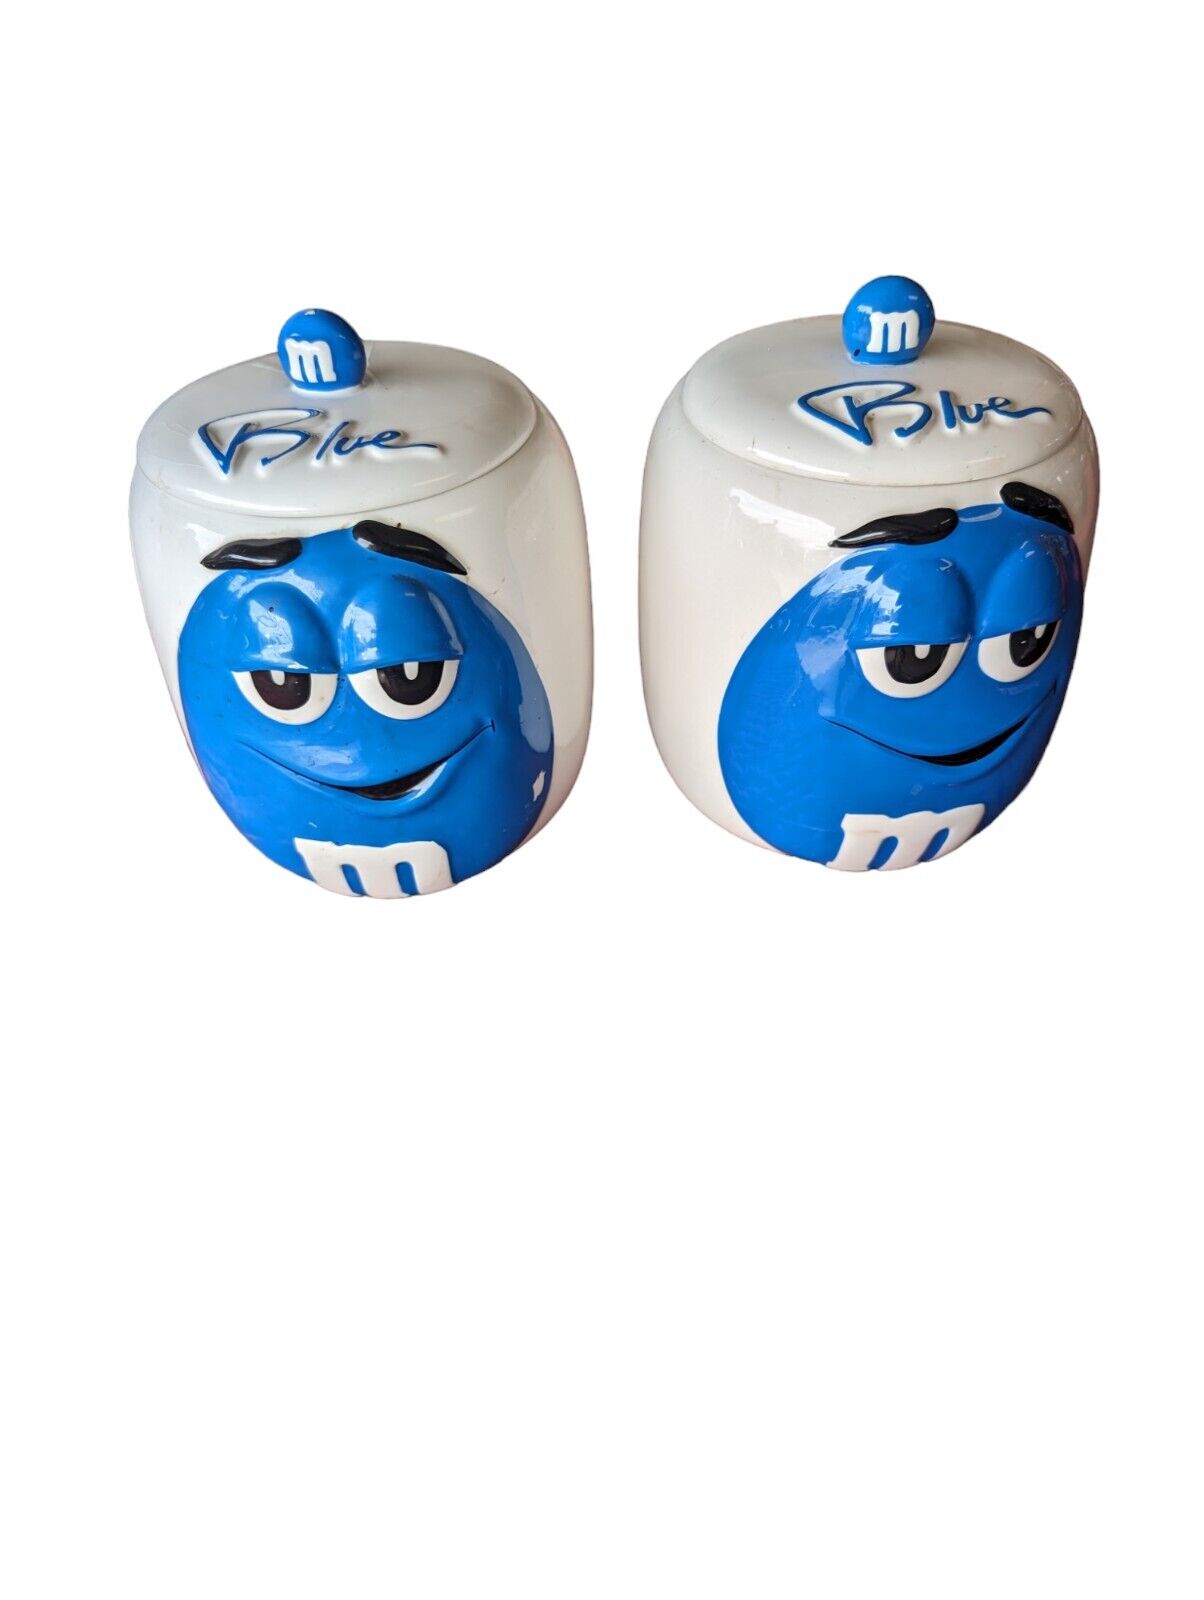 2 M&M\'s Ceramic Candy Cookie Jars with Lid Canisters Blue Galerie 2003